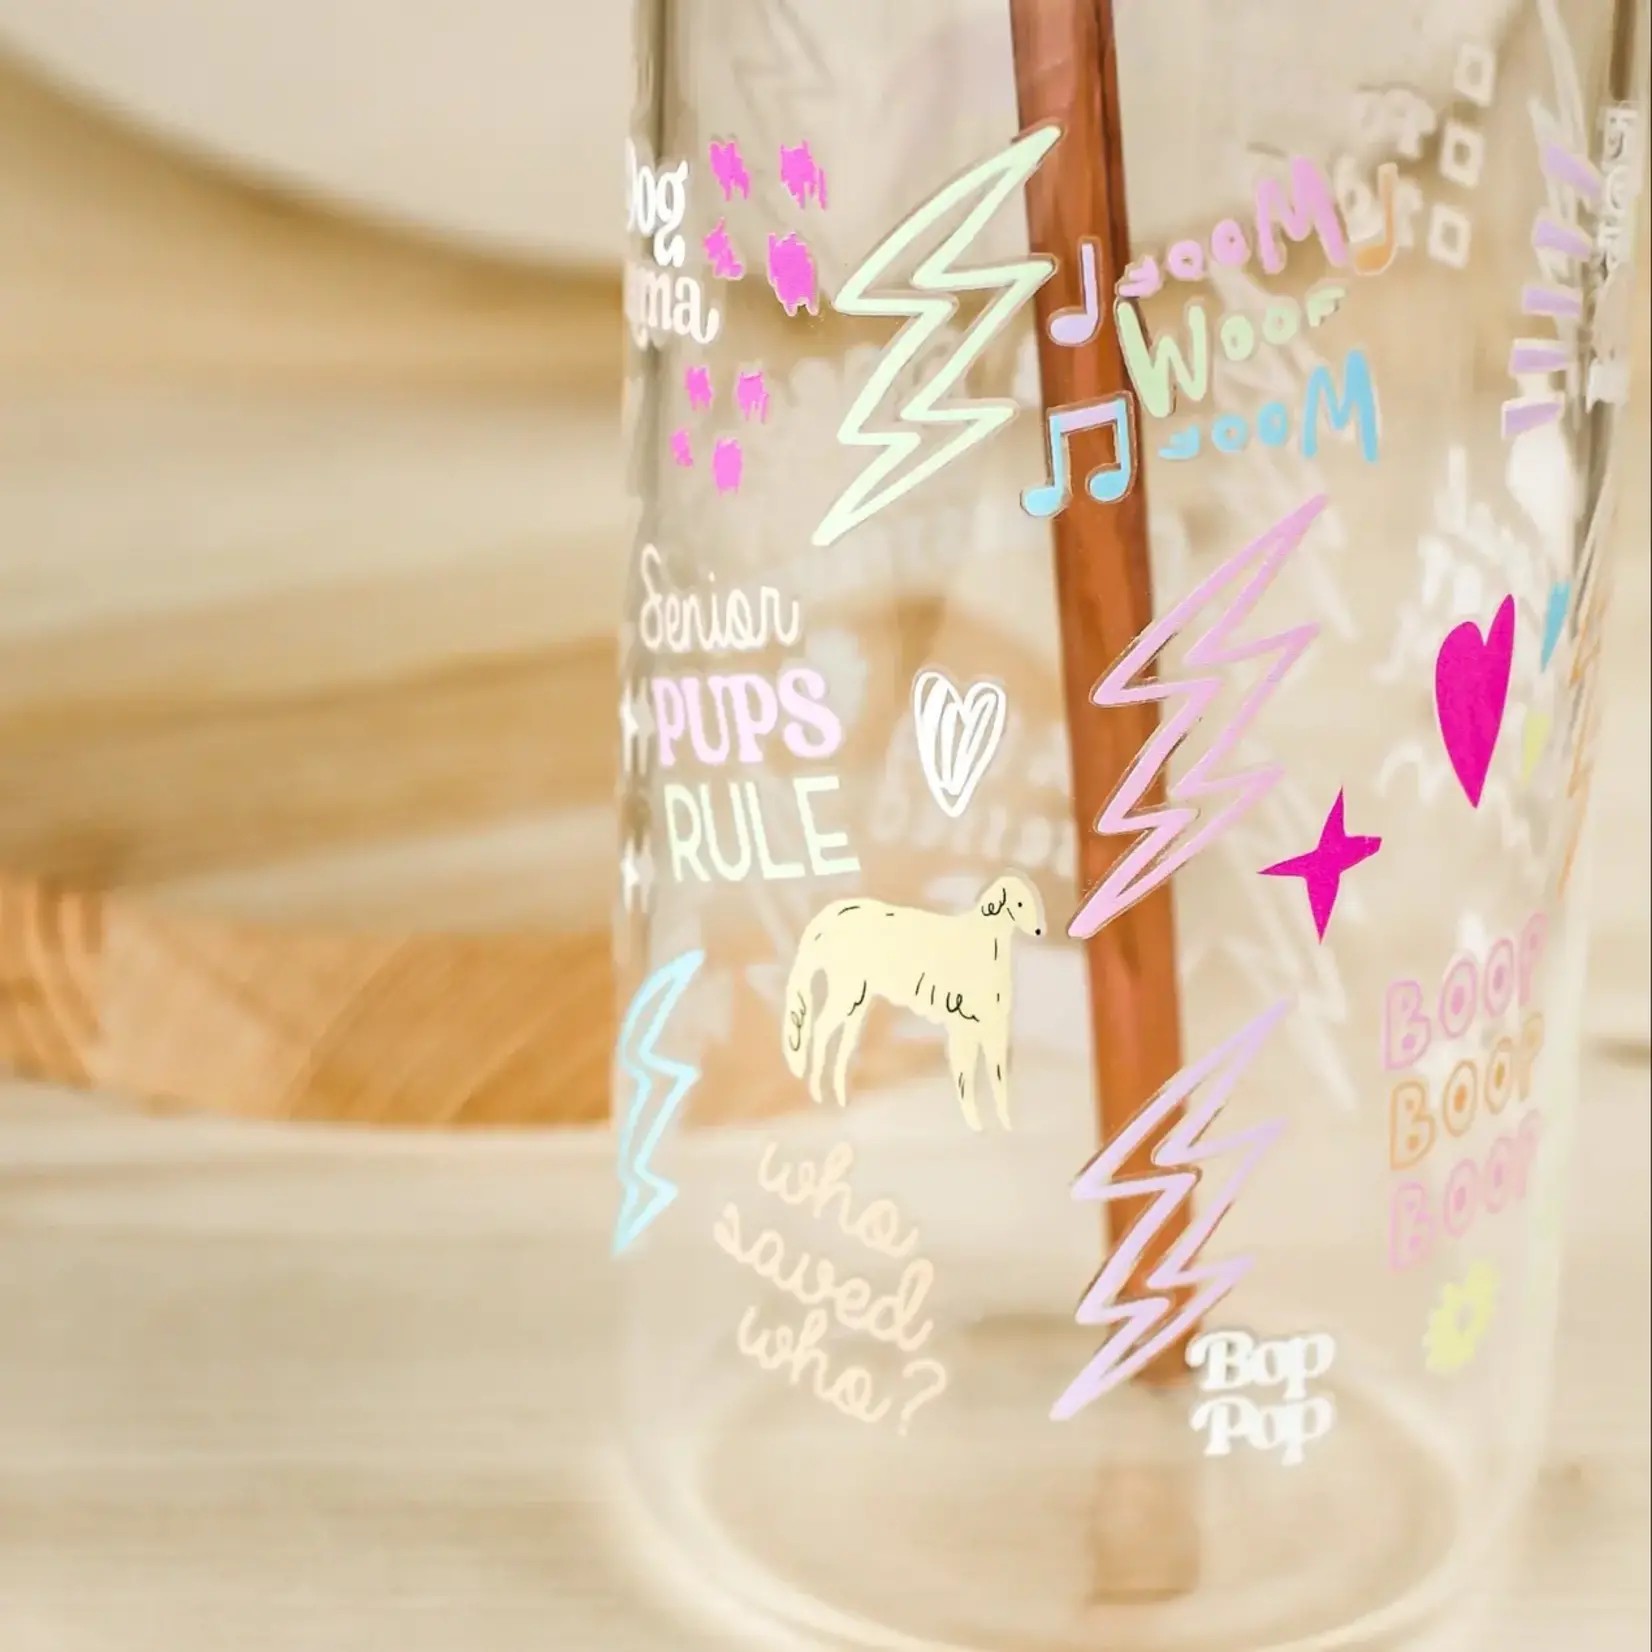 Bop Pop Pets Dog Obsessed Beer Can Glass